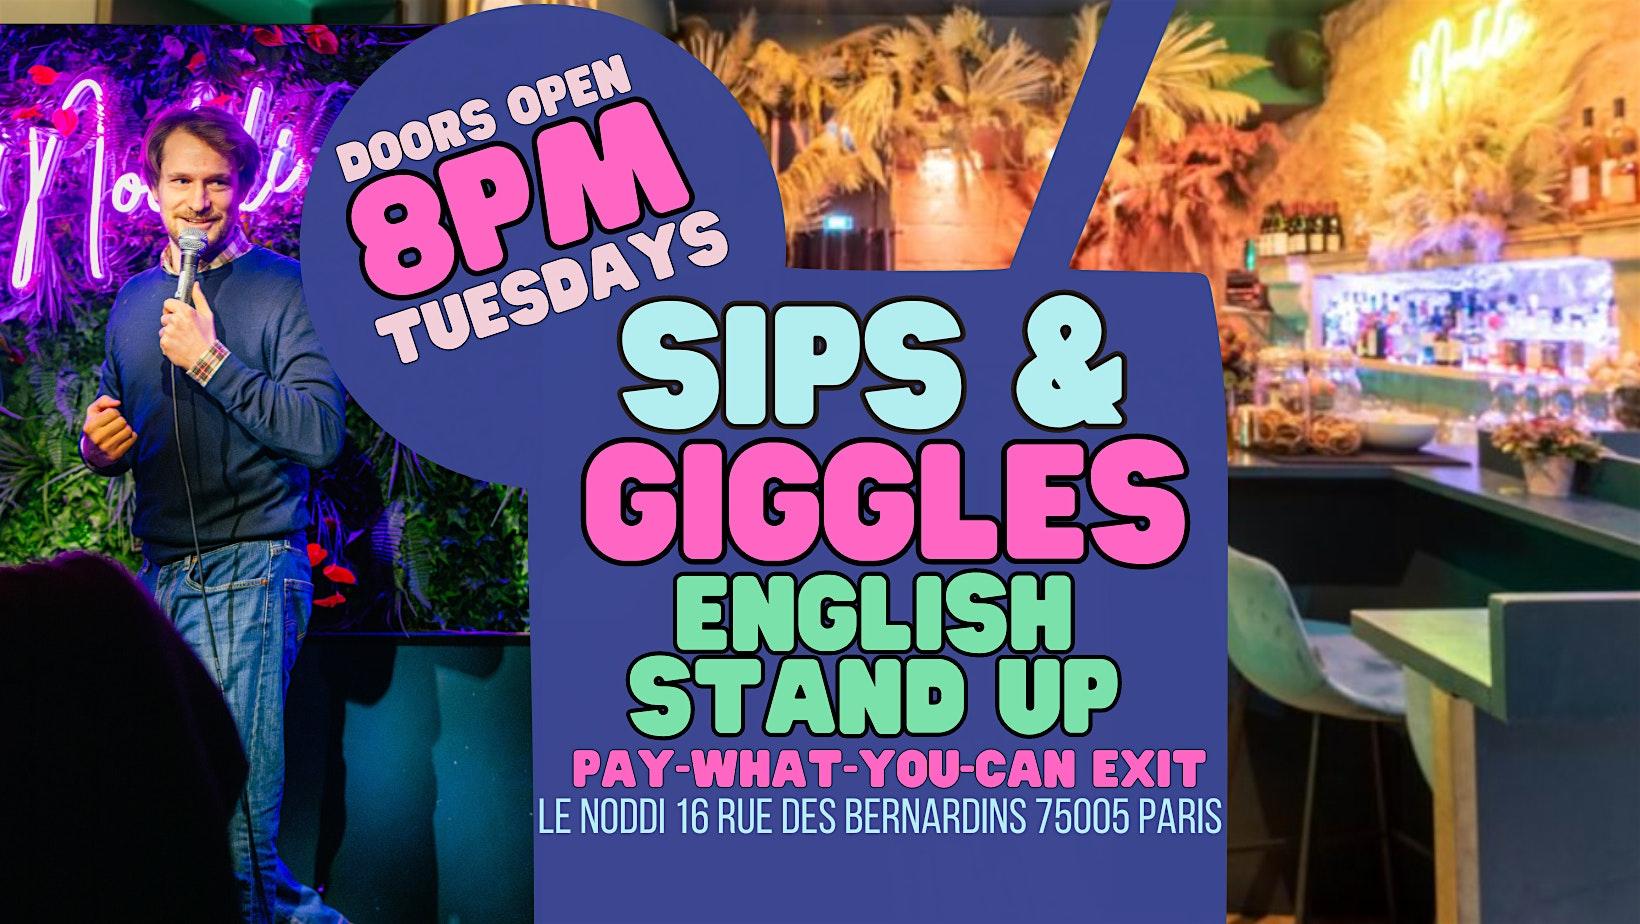 English Stand-Up in Paris - Sips & Giggles logo